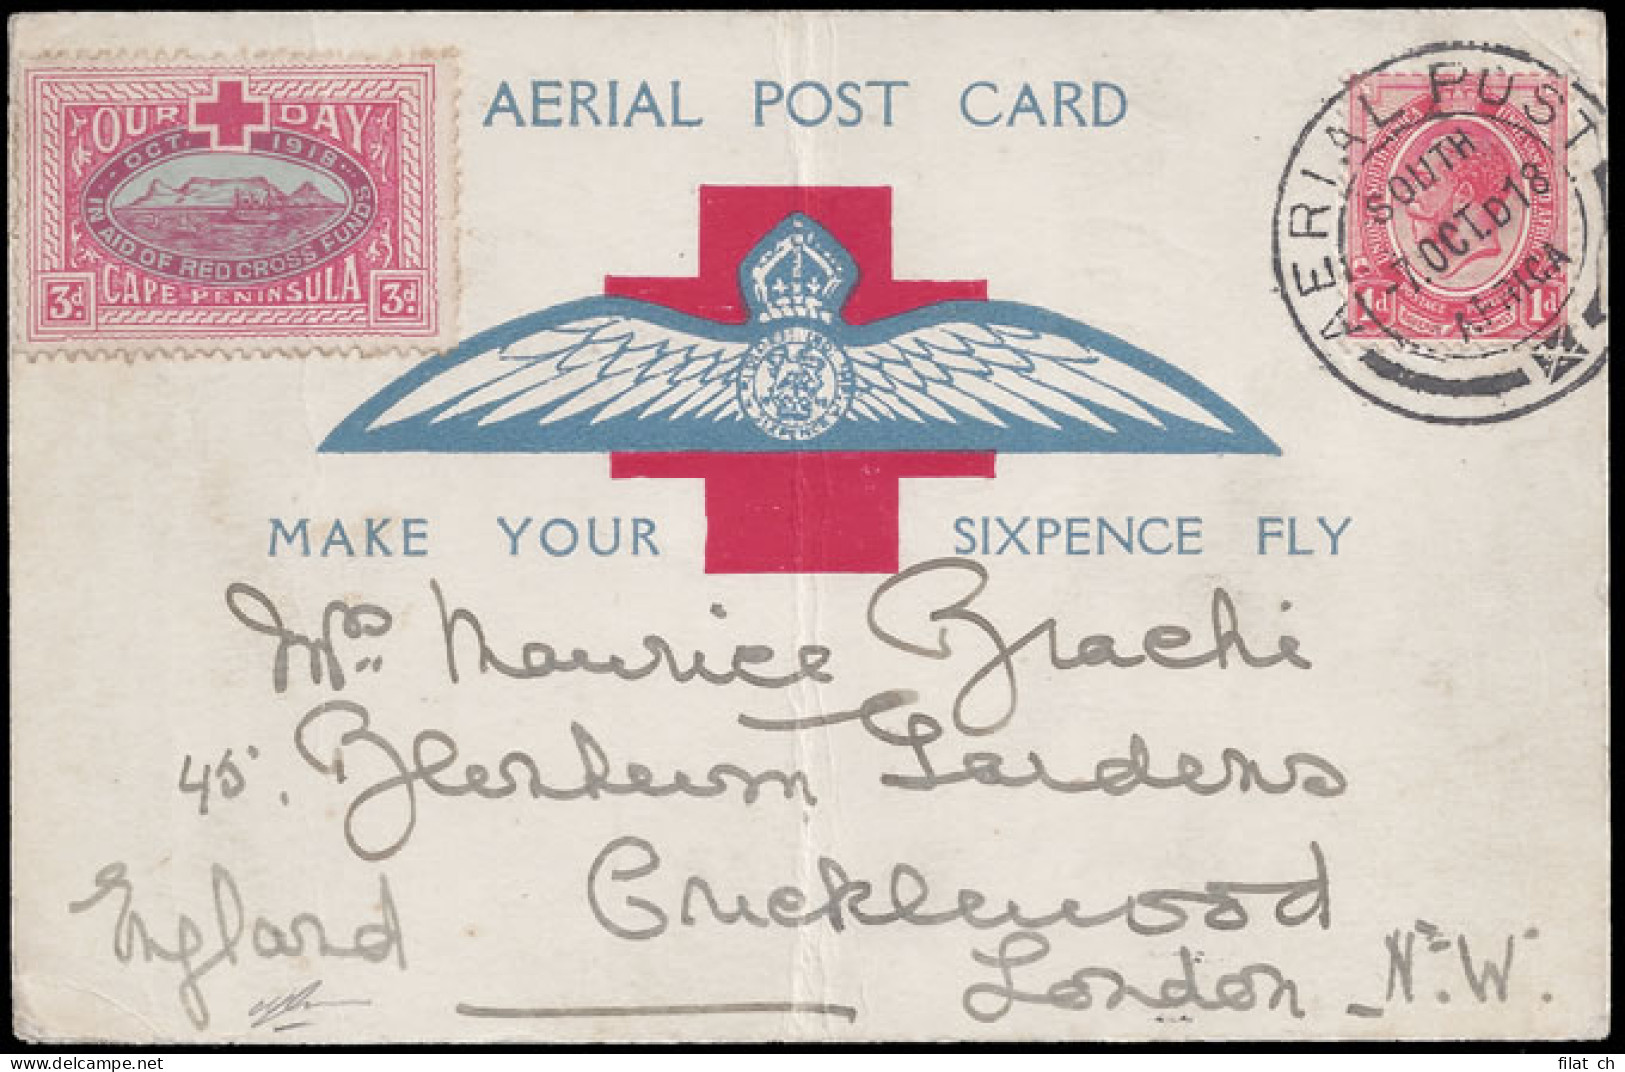 South Africa 1918 Cape Town First Flight Card, Our Day Label - Luchtpost